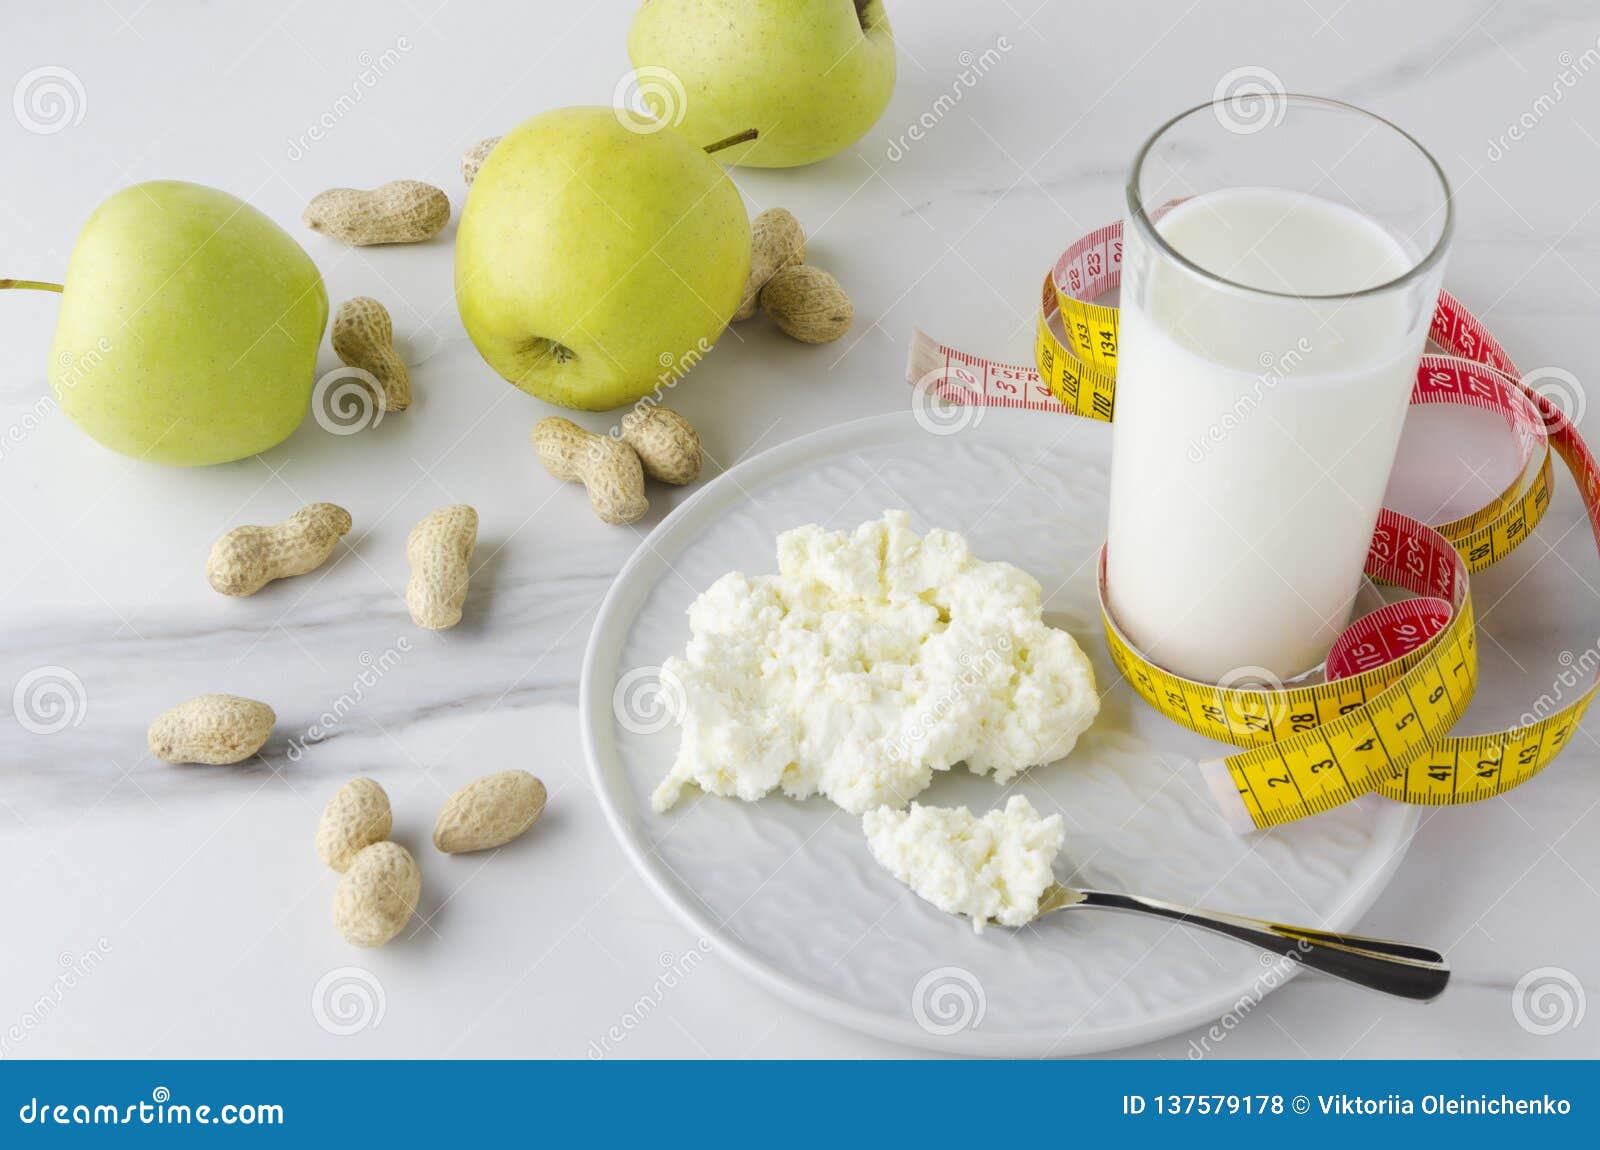 Concept Of Delicious Meal For Milk Diet And Loss Weight Glass Of